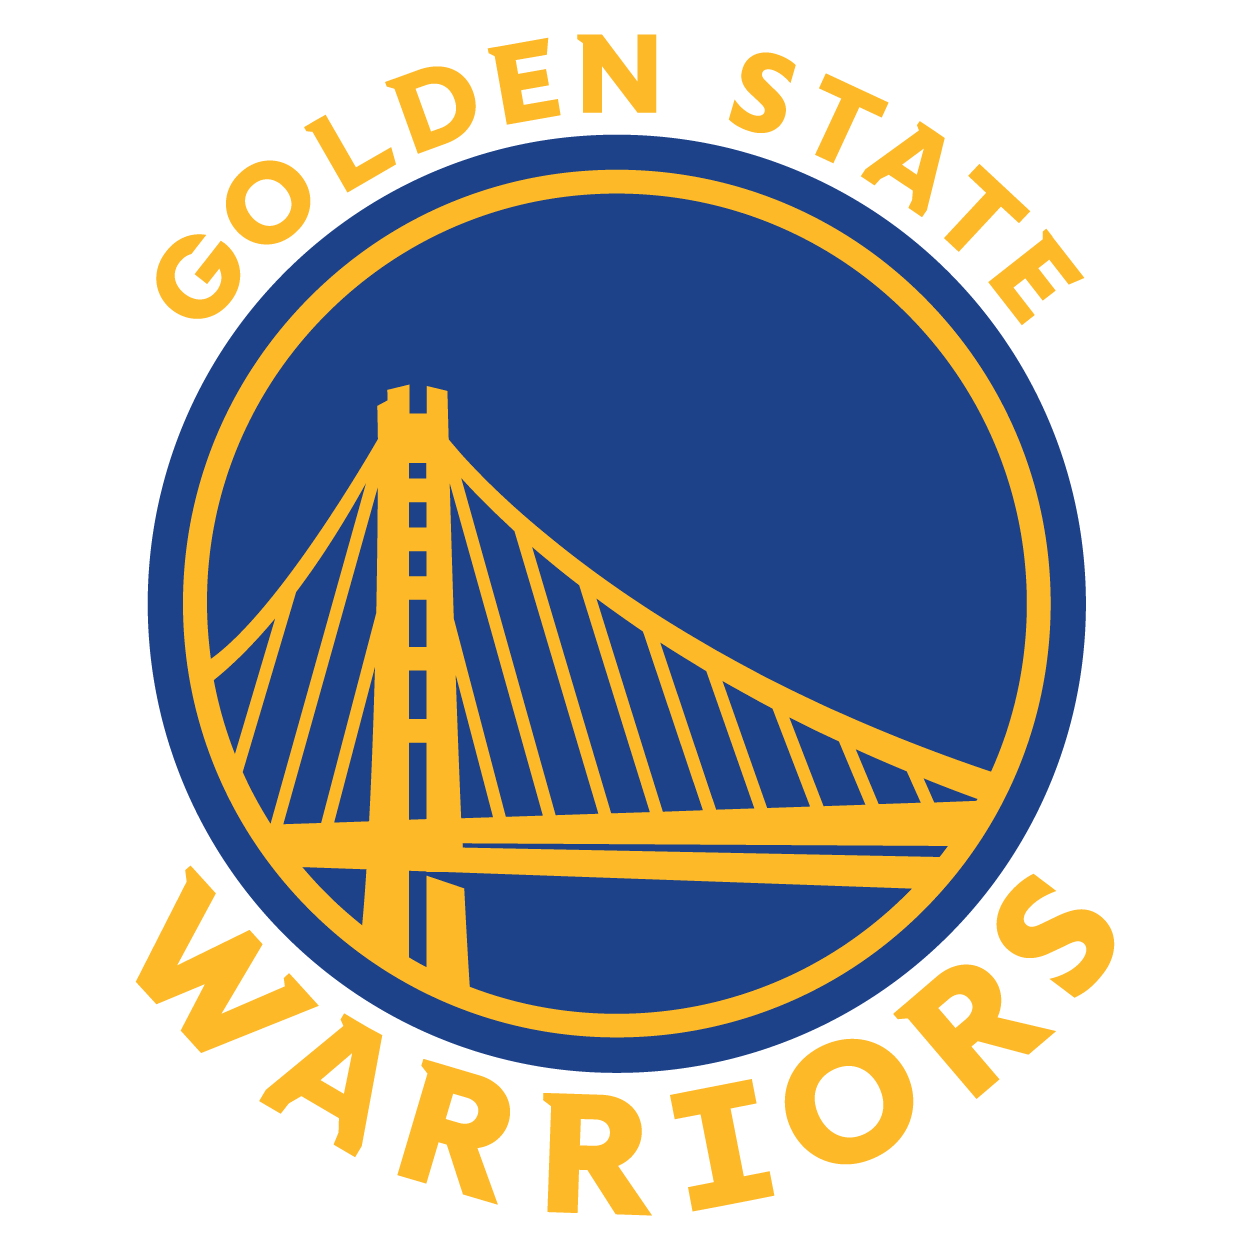 Golden State's